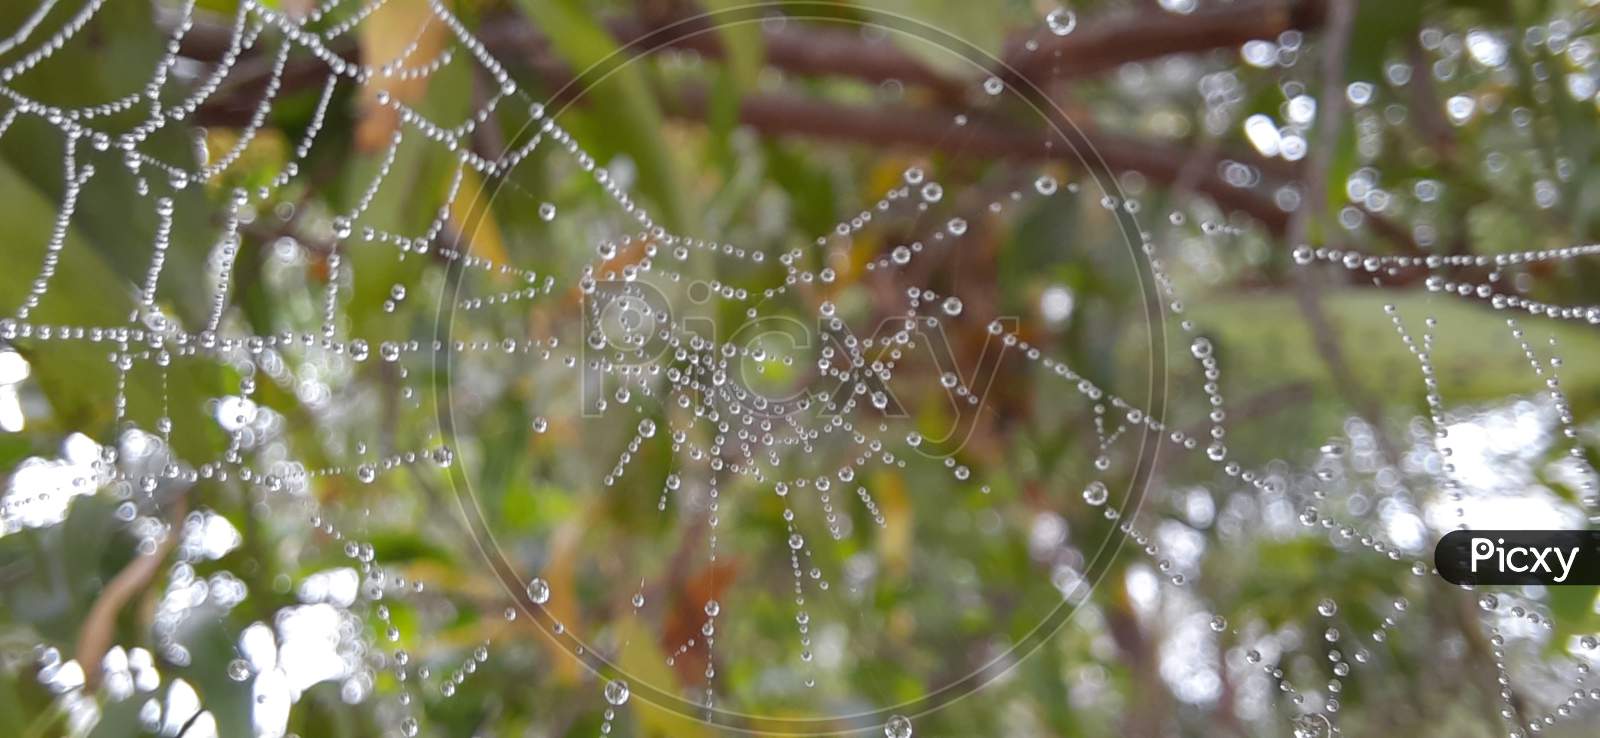 A spider web covered with Fog Drops, Natures beauty with Fog Drops